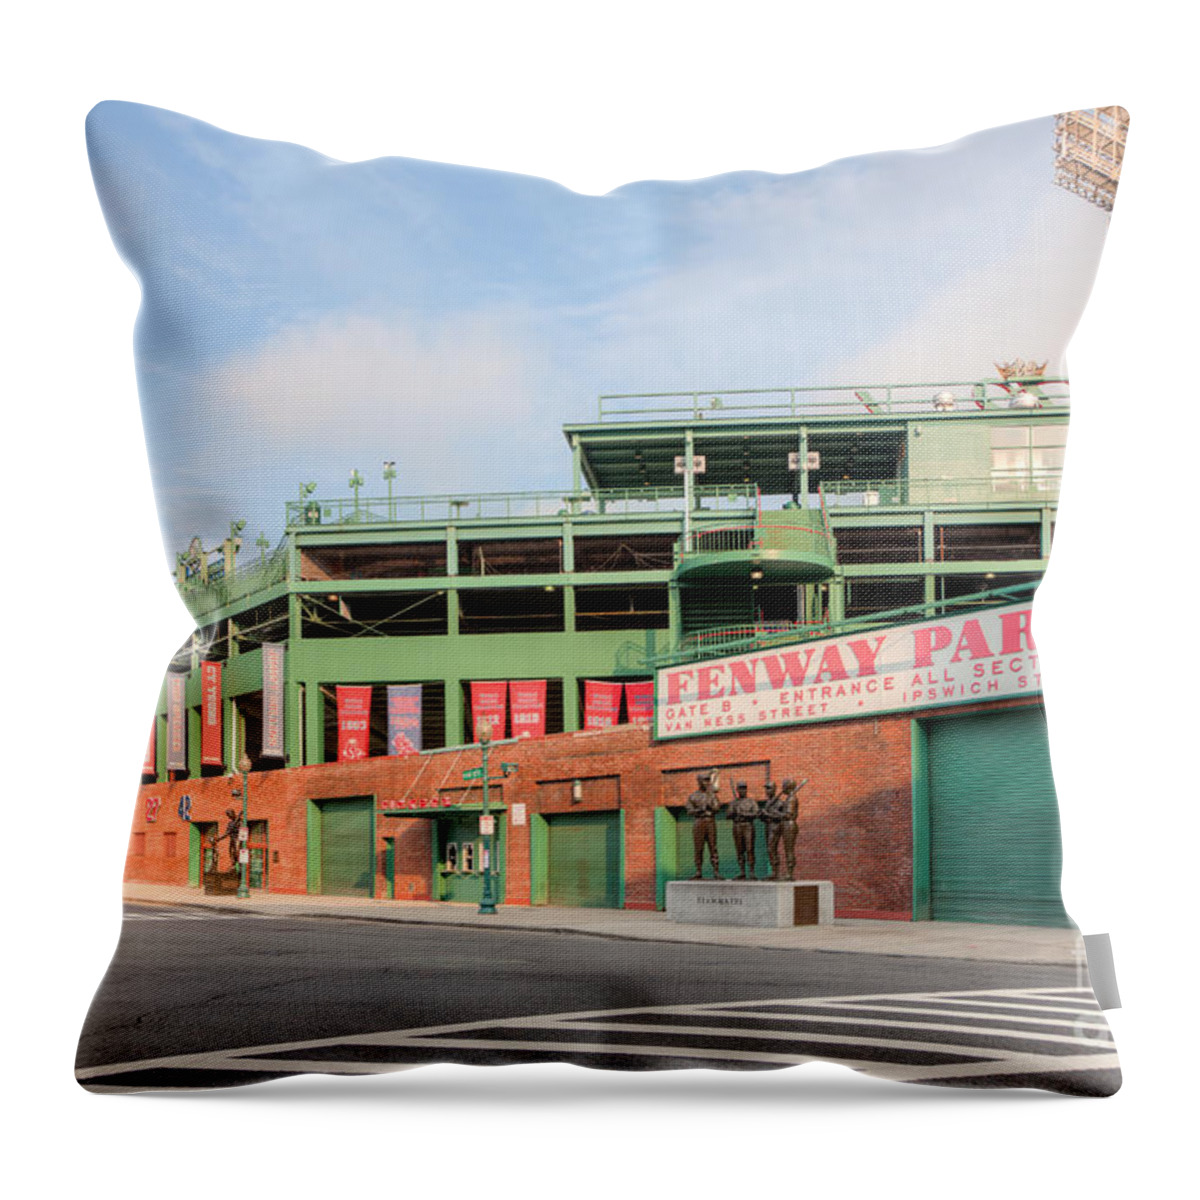 Clarence Holmes Throw Pillow featuring the photograph Fenway Park I by Clarence Holmes